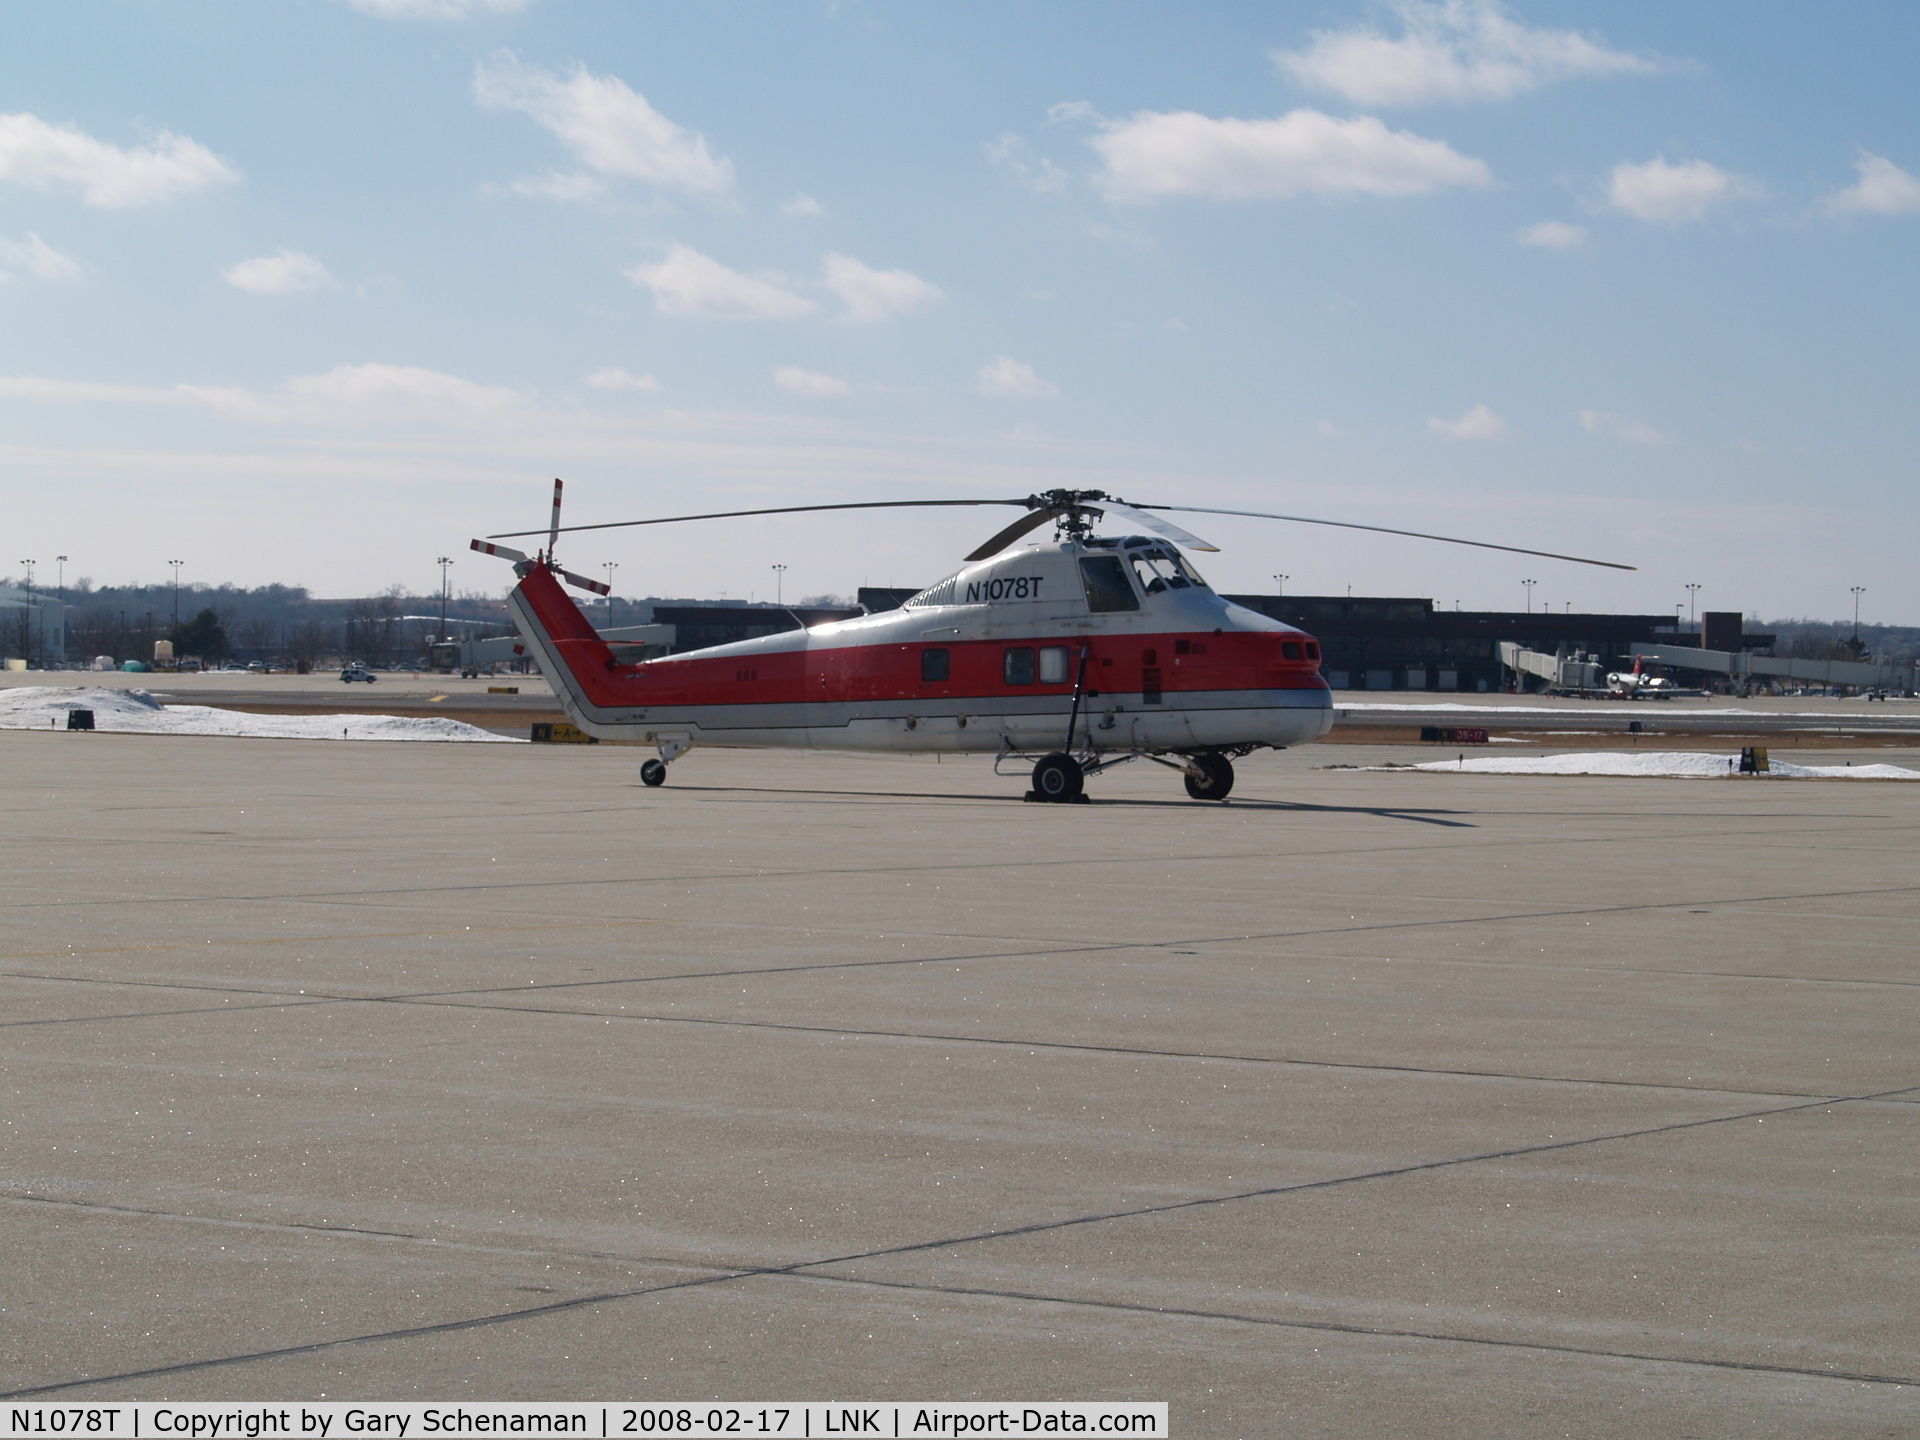 N1078T, 1958 Sikorsky S-58HT C/N 581016, OLD HELICOPTER